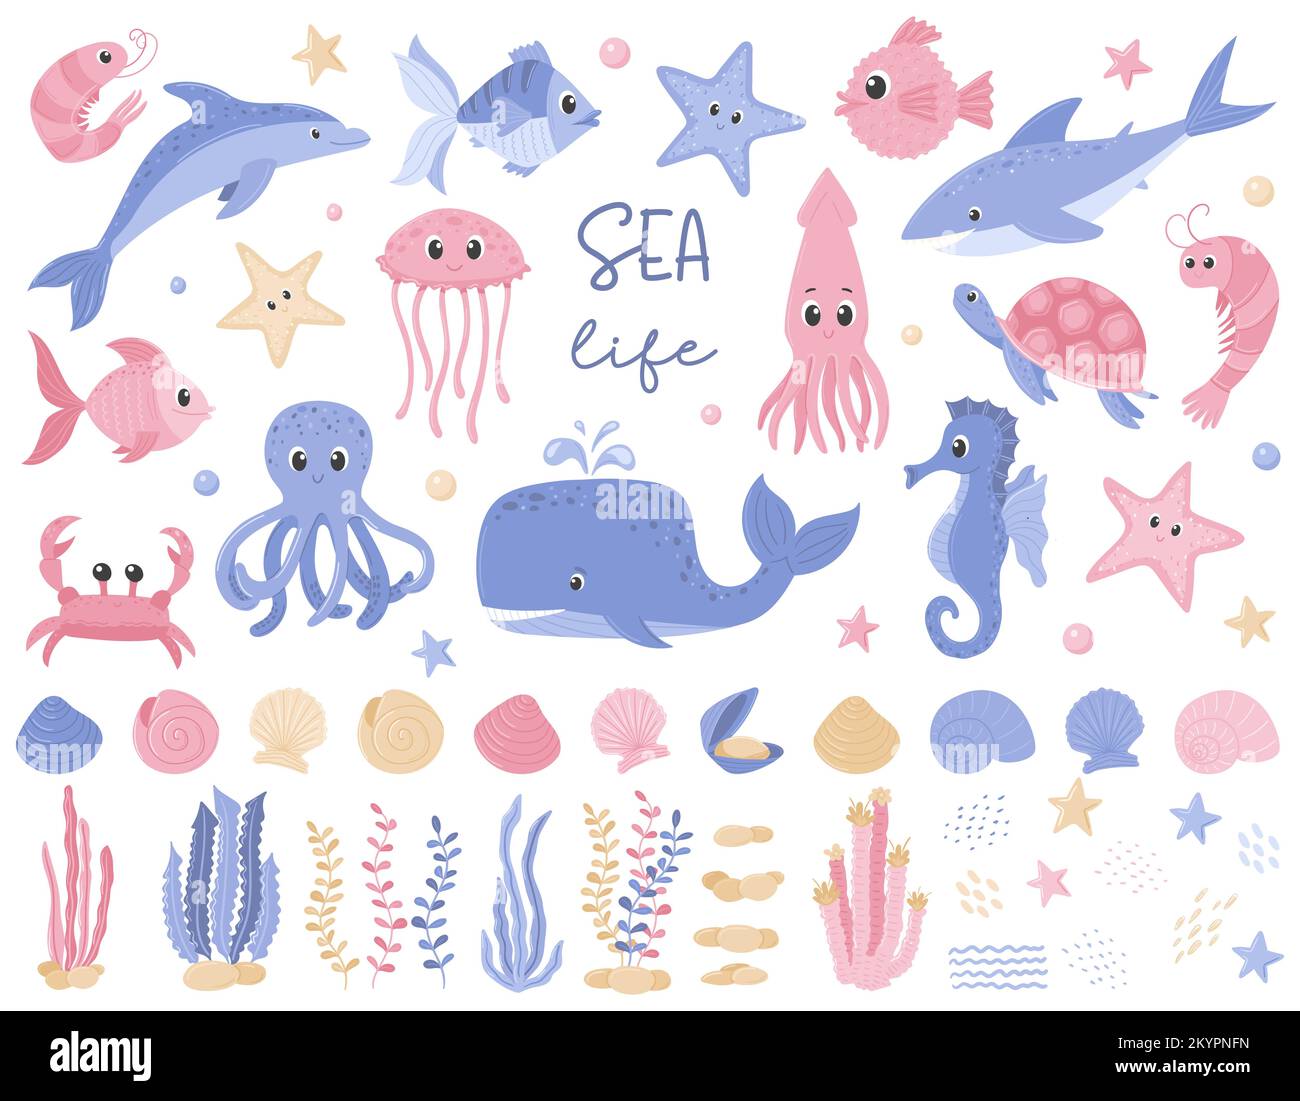 A set of cute cartoon fish. Whale, octopus, squid, turtle, shrimp. Collection of funny sea animals, algae, plants, rocks. Flat vector illustrations is Stock Vector